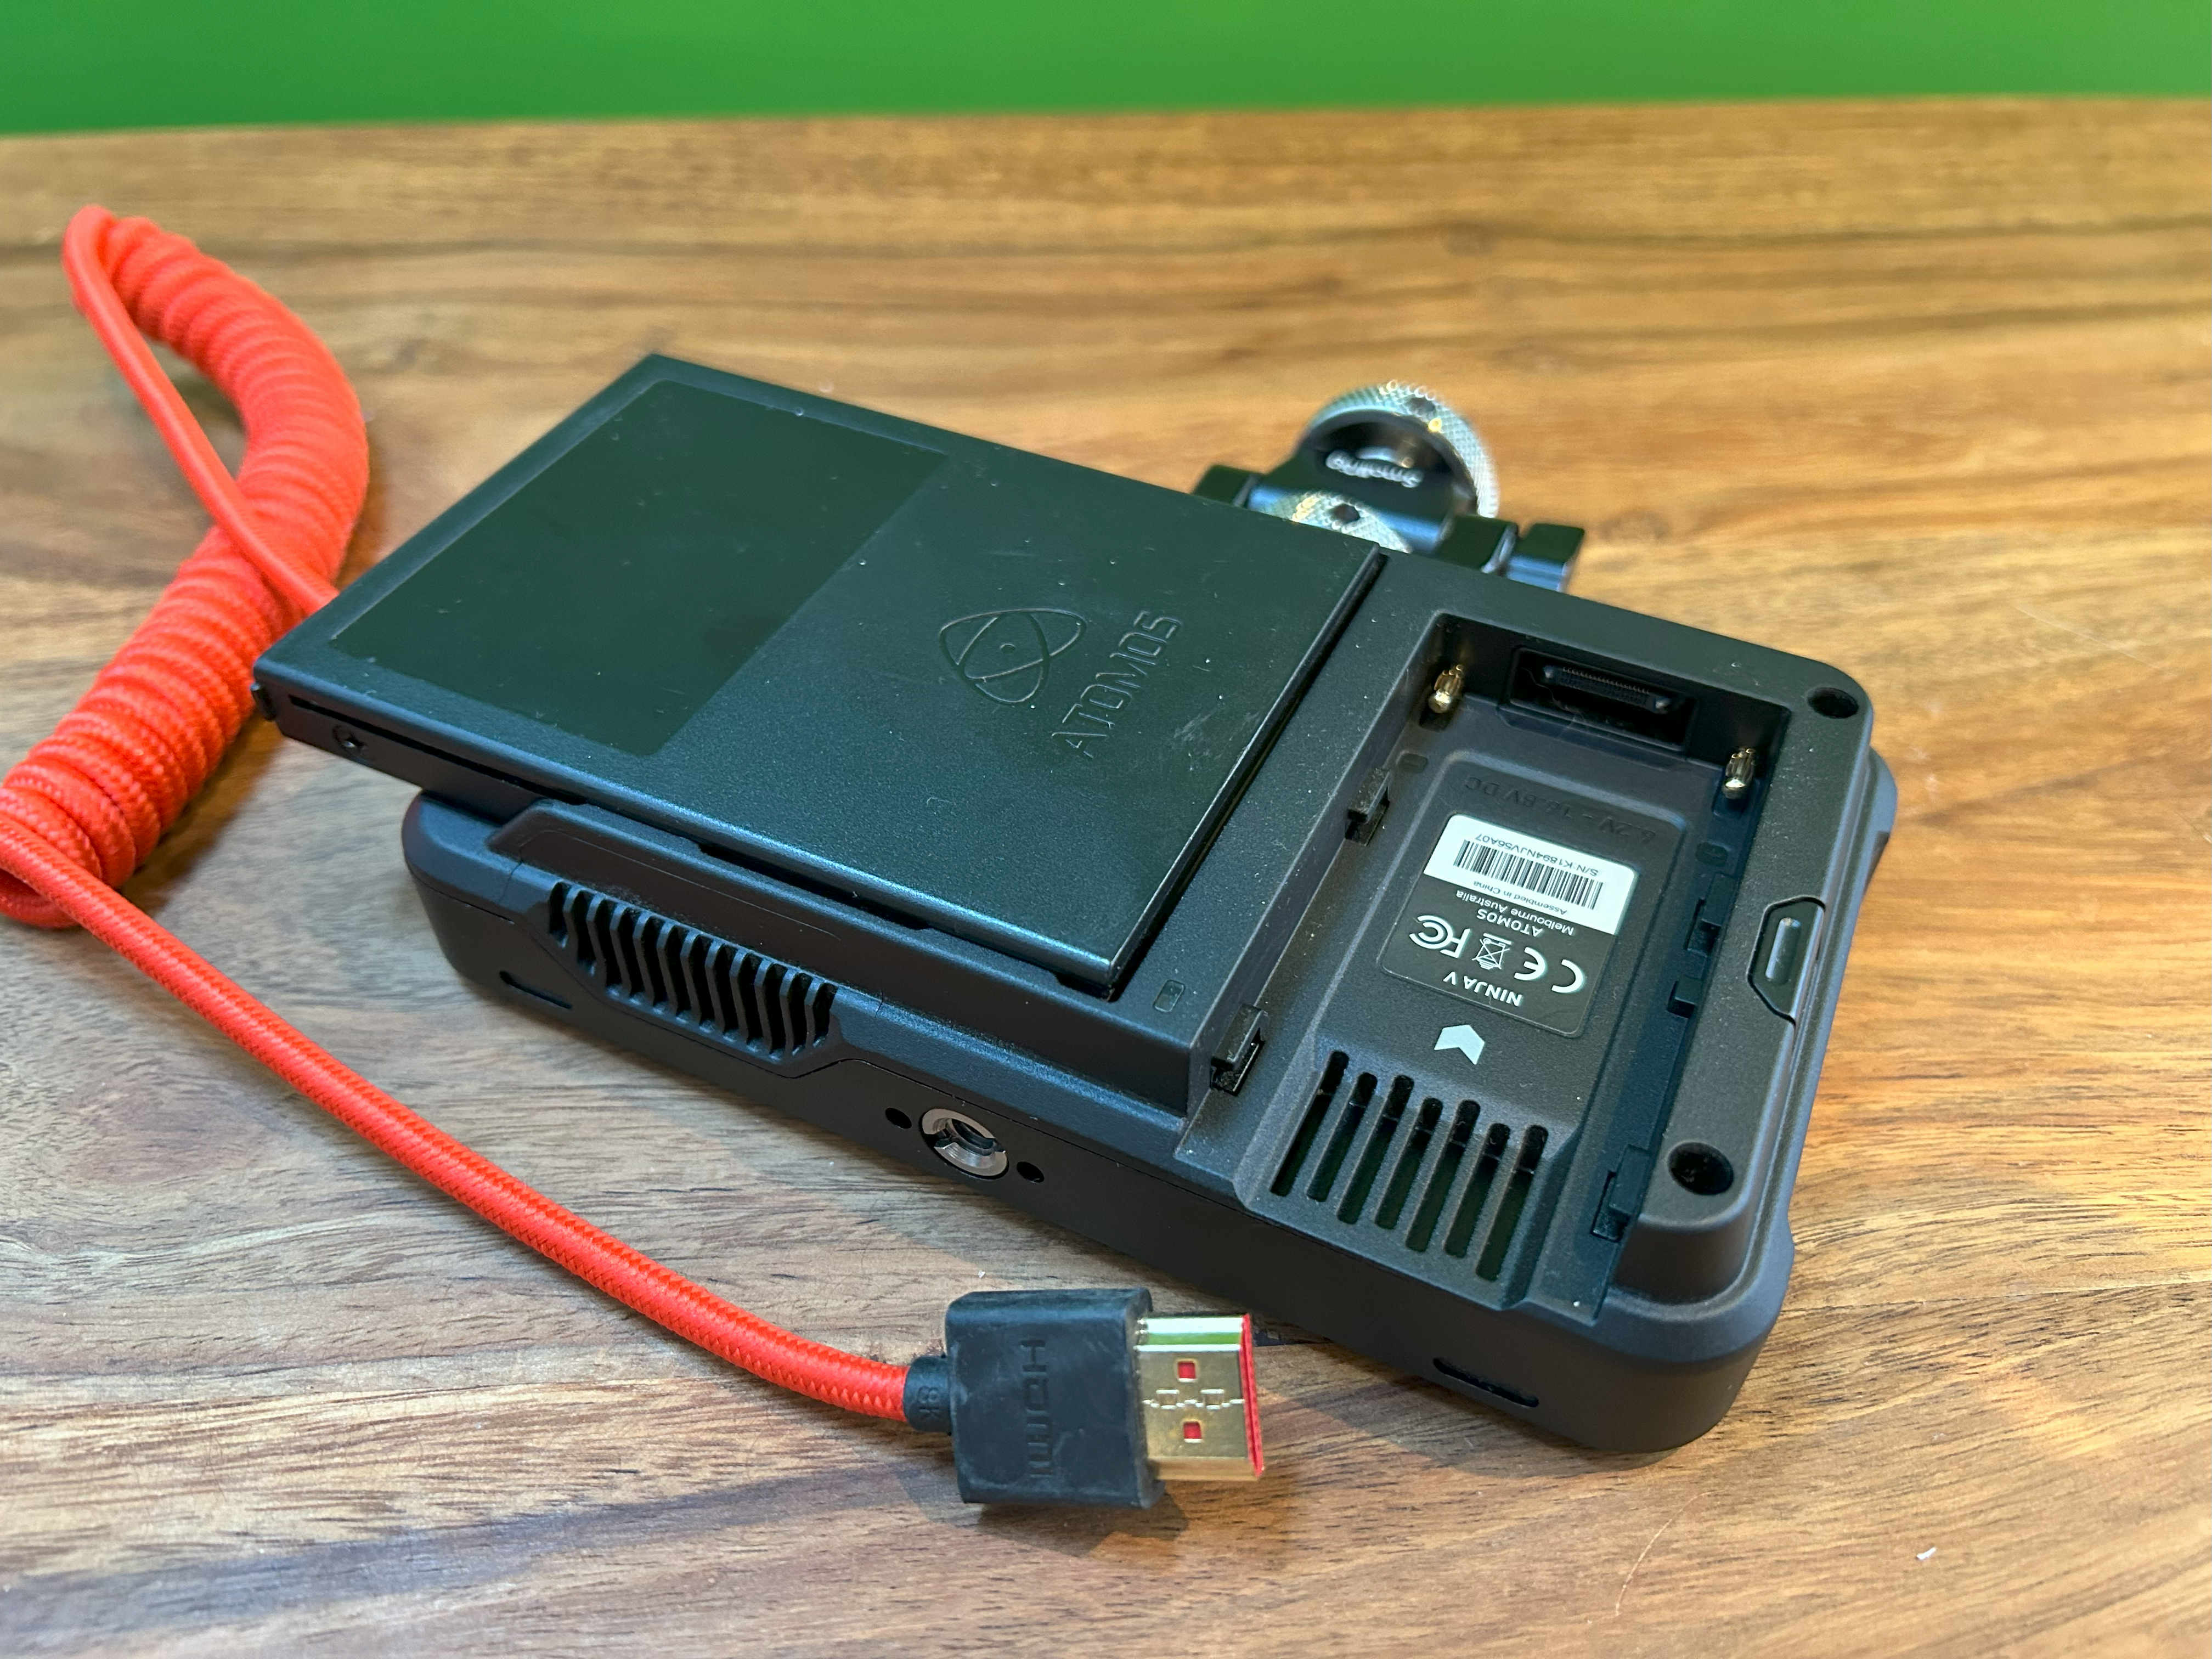 Atomos Ninja V without battery but with SSD